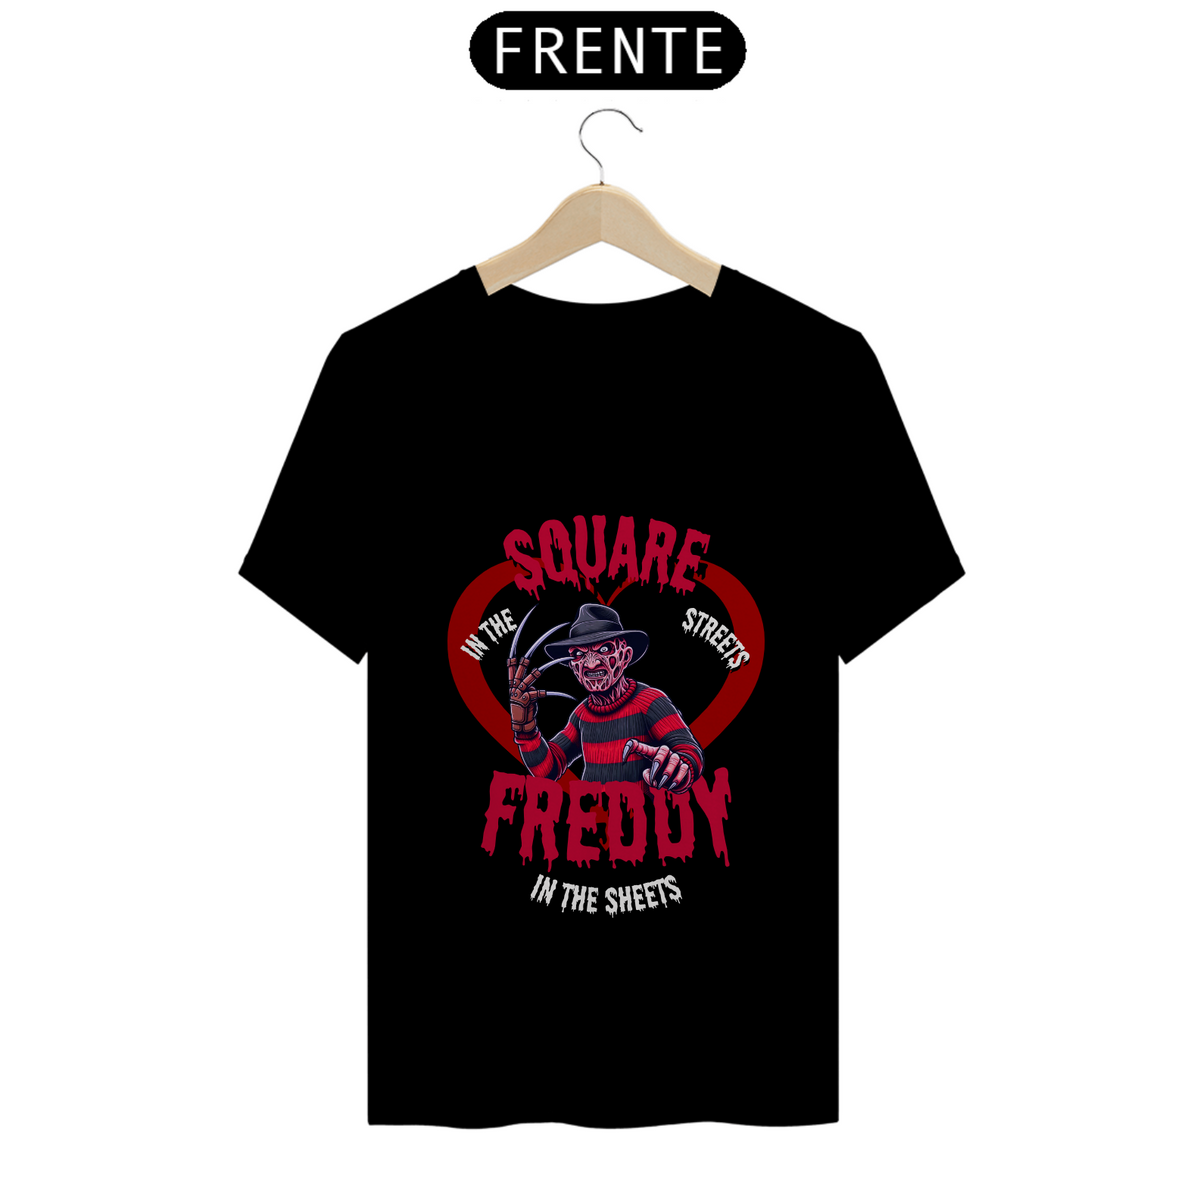 Nome do produto: T-shirt - Freddy In the sheets